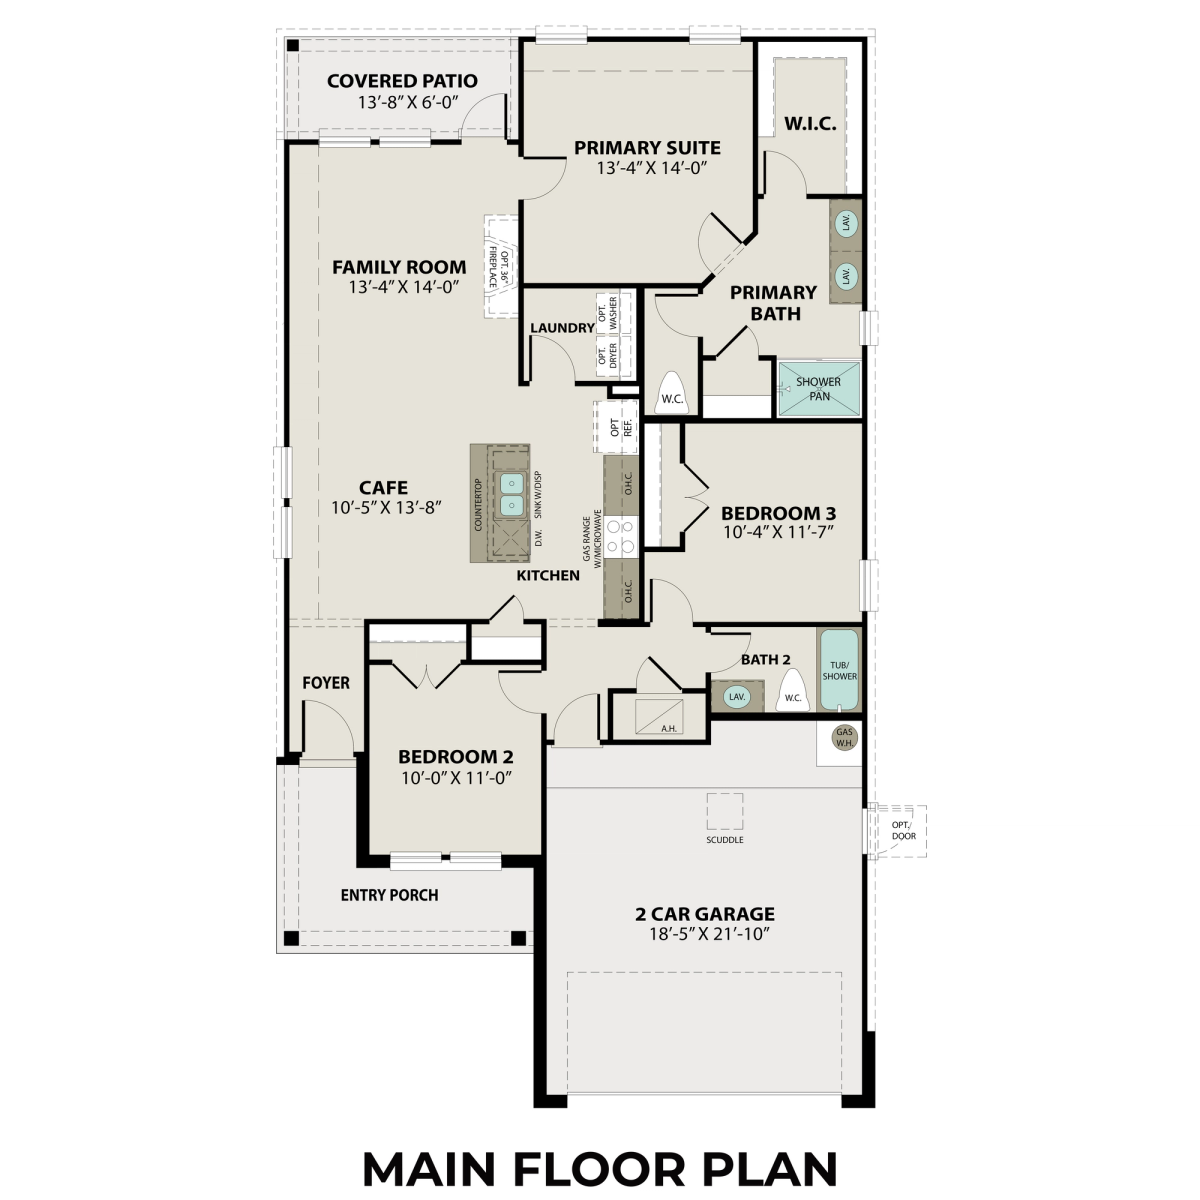 1 - The Costa C floor plan layout for 2504 Bolinas Bluff Drive in Davidson Homes' Sunterra community.